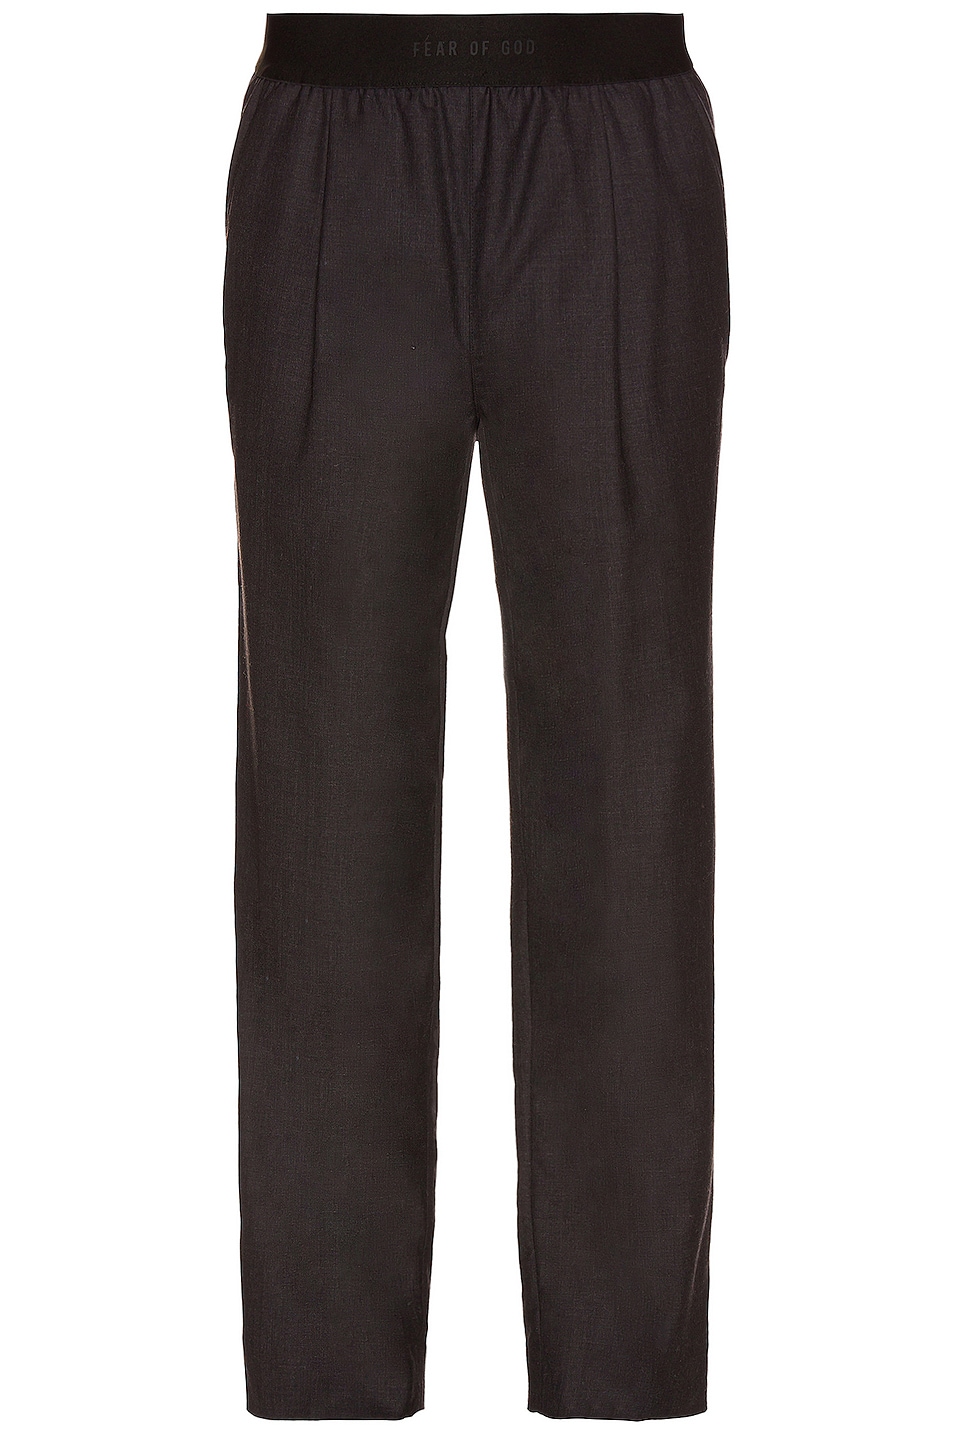 Image 1 of Fear of God Everyday Trouser in Charcoal